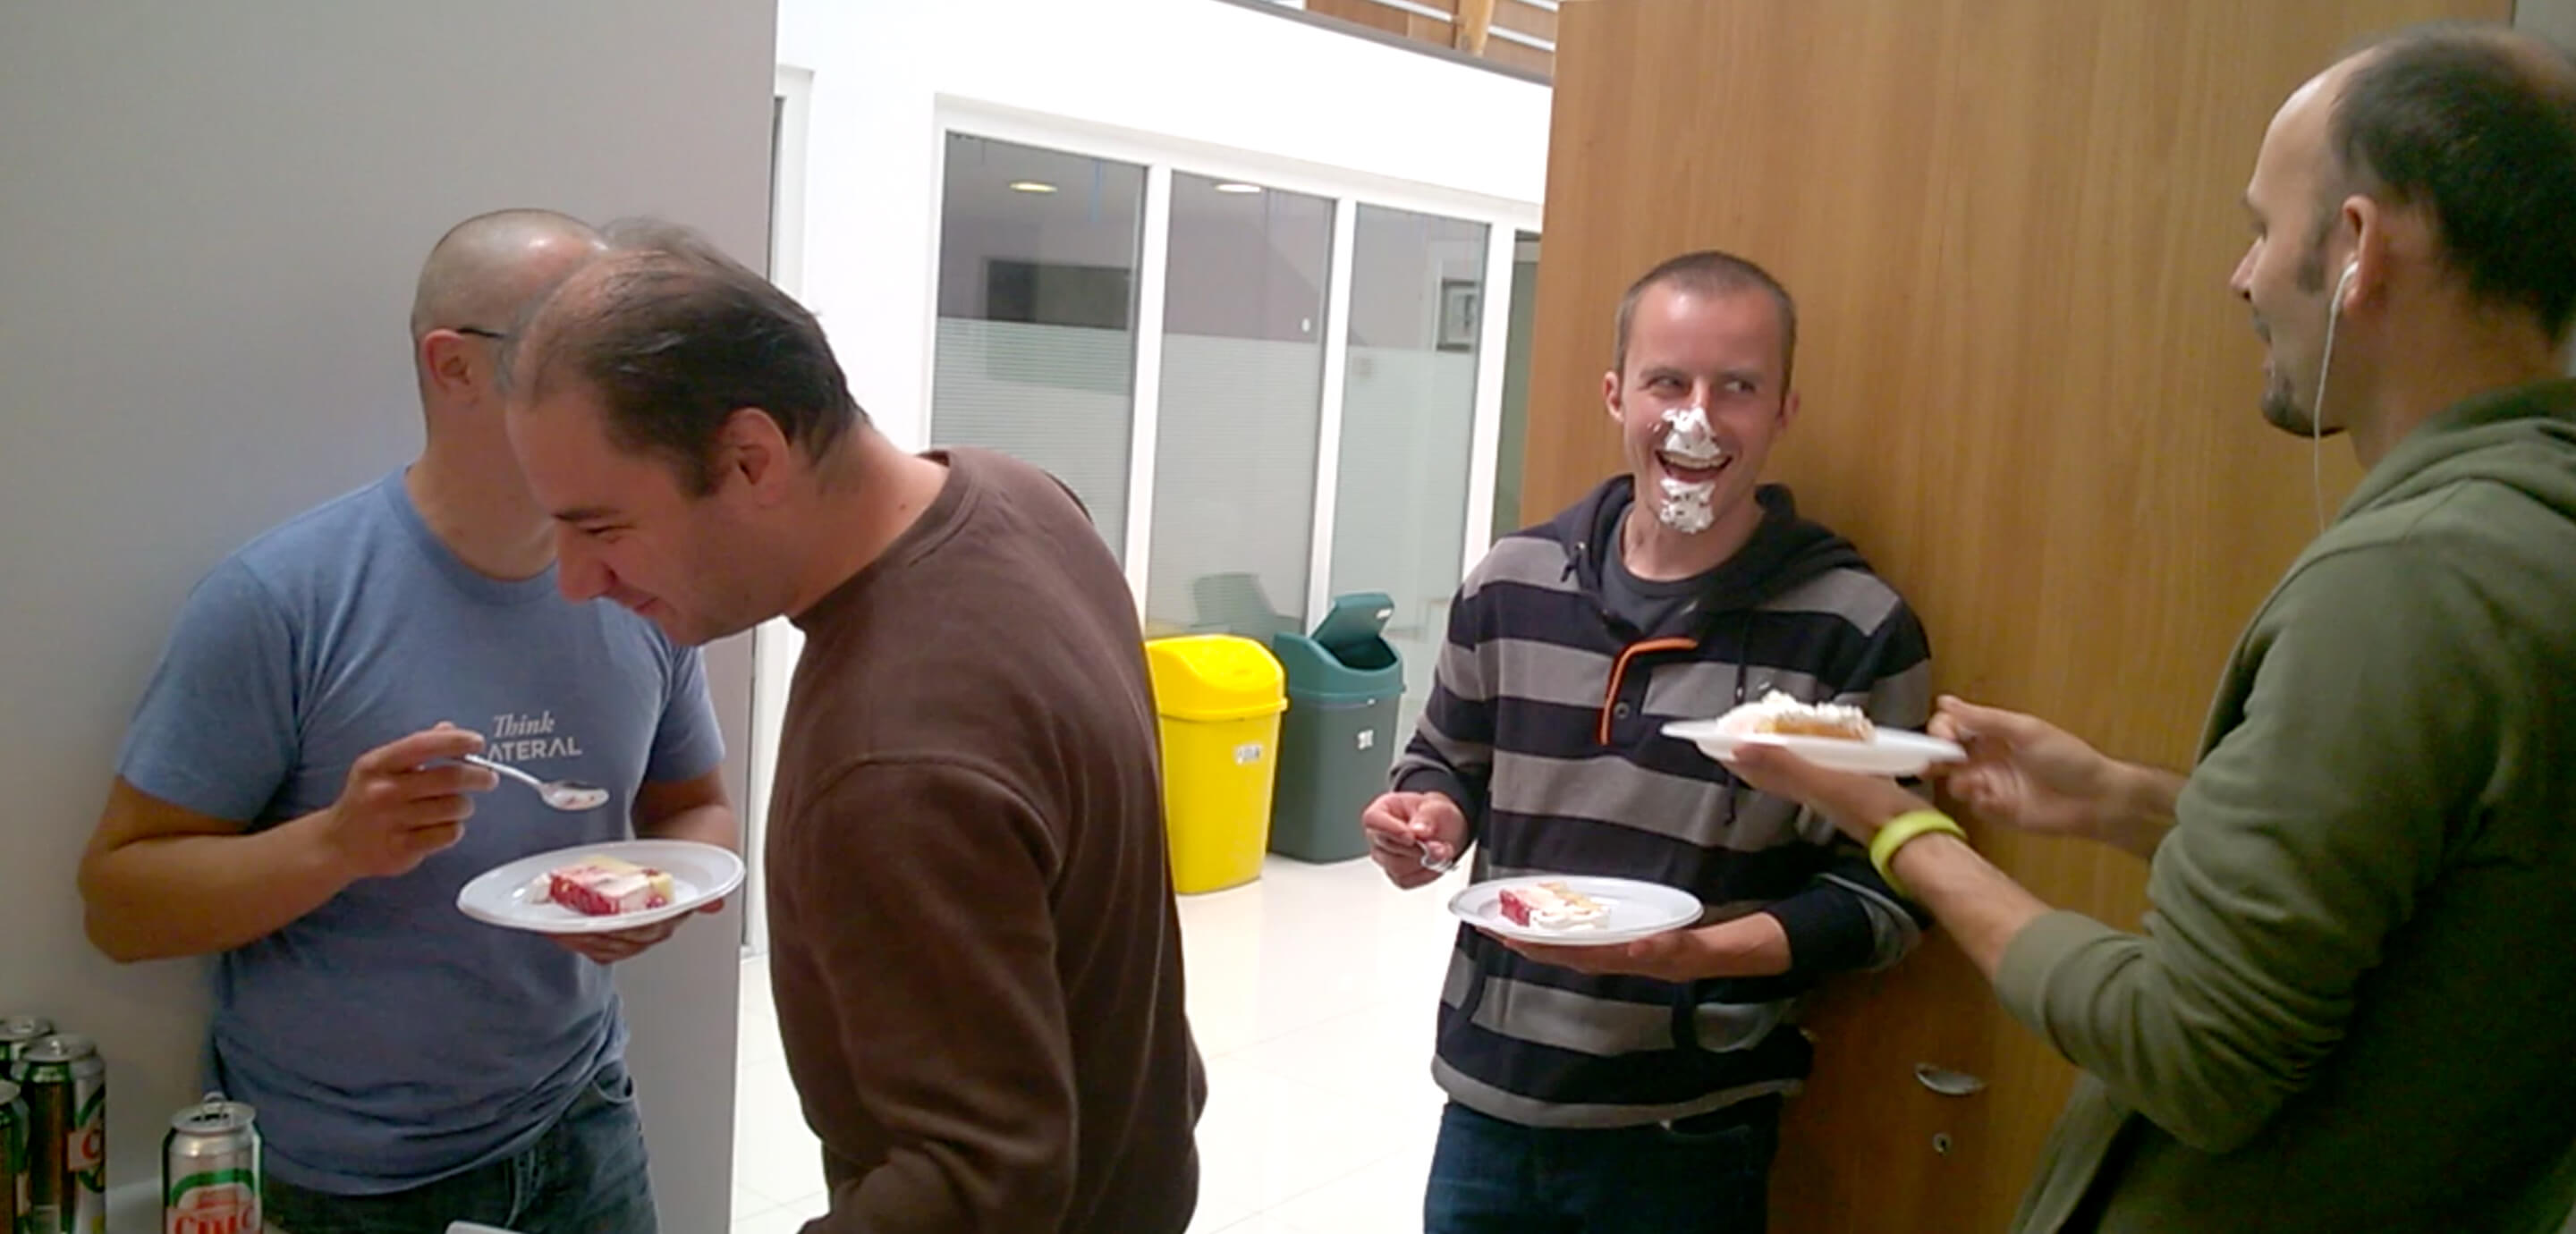 Office - Mures - Another funny tradition: newbie Laterals tasting the cake